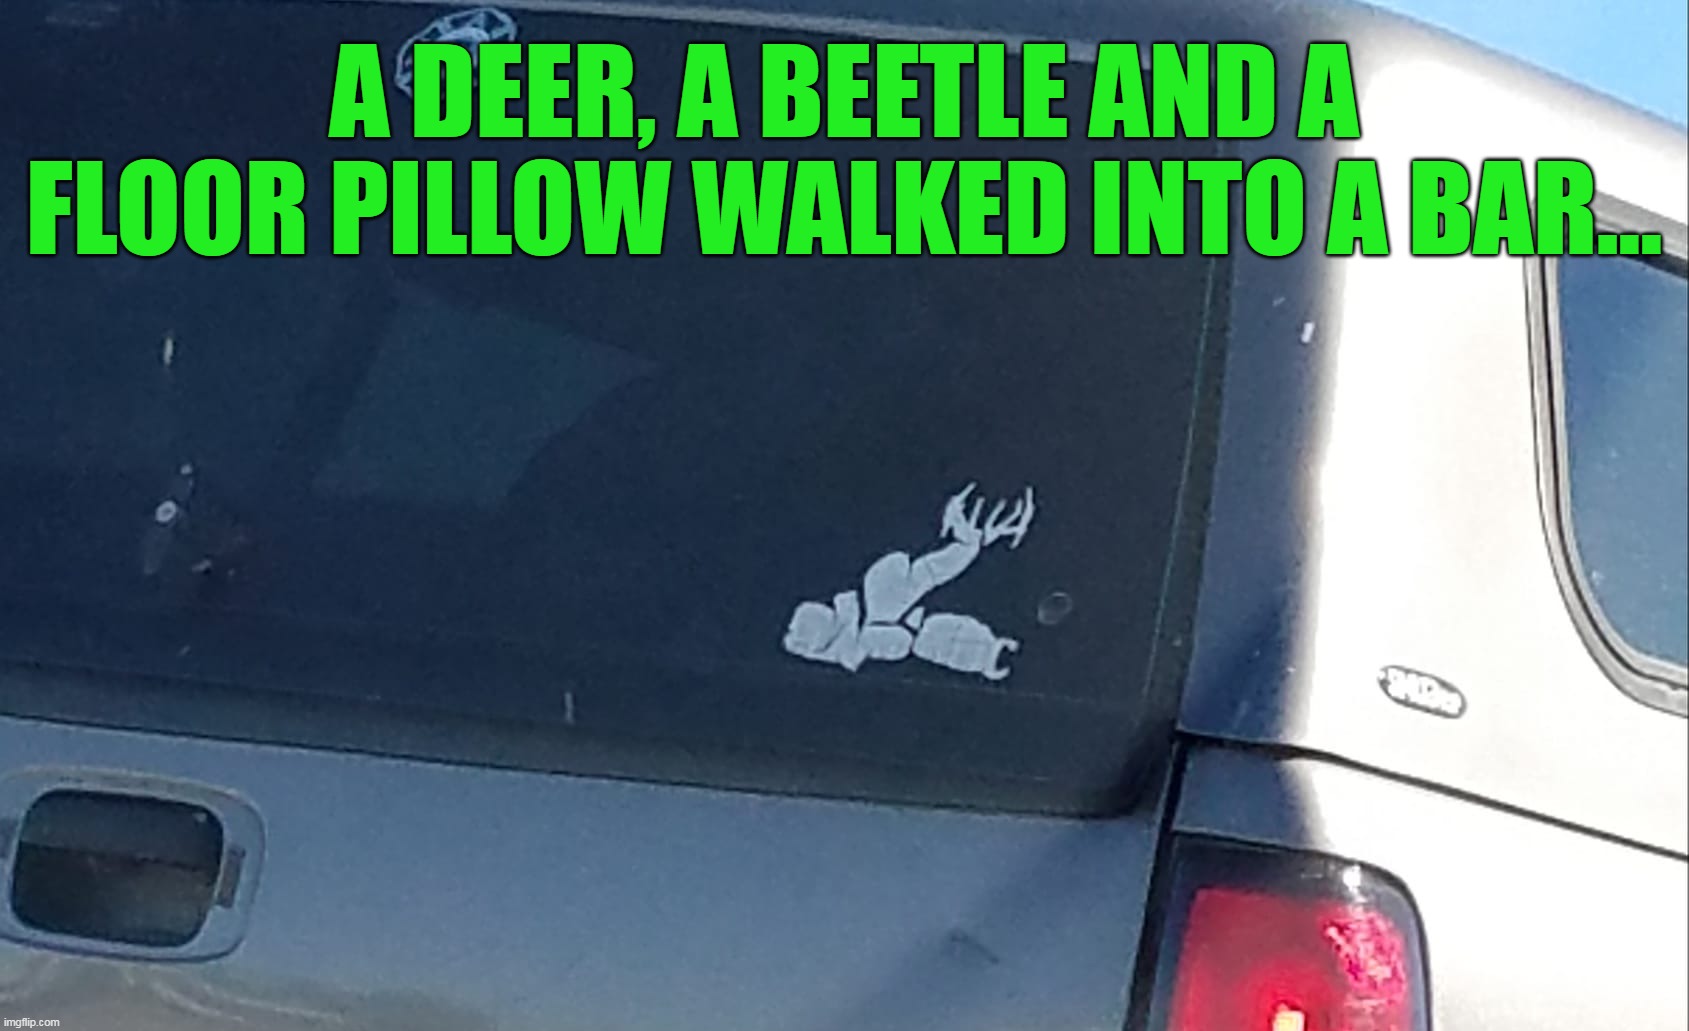 A DEER, A BEETLE AND A FLOOR PILLOW WALKED INTO A BAR... | image tagged in meme,memes,funny,humor | made w/ Imgflip meme maker